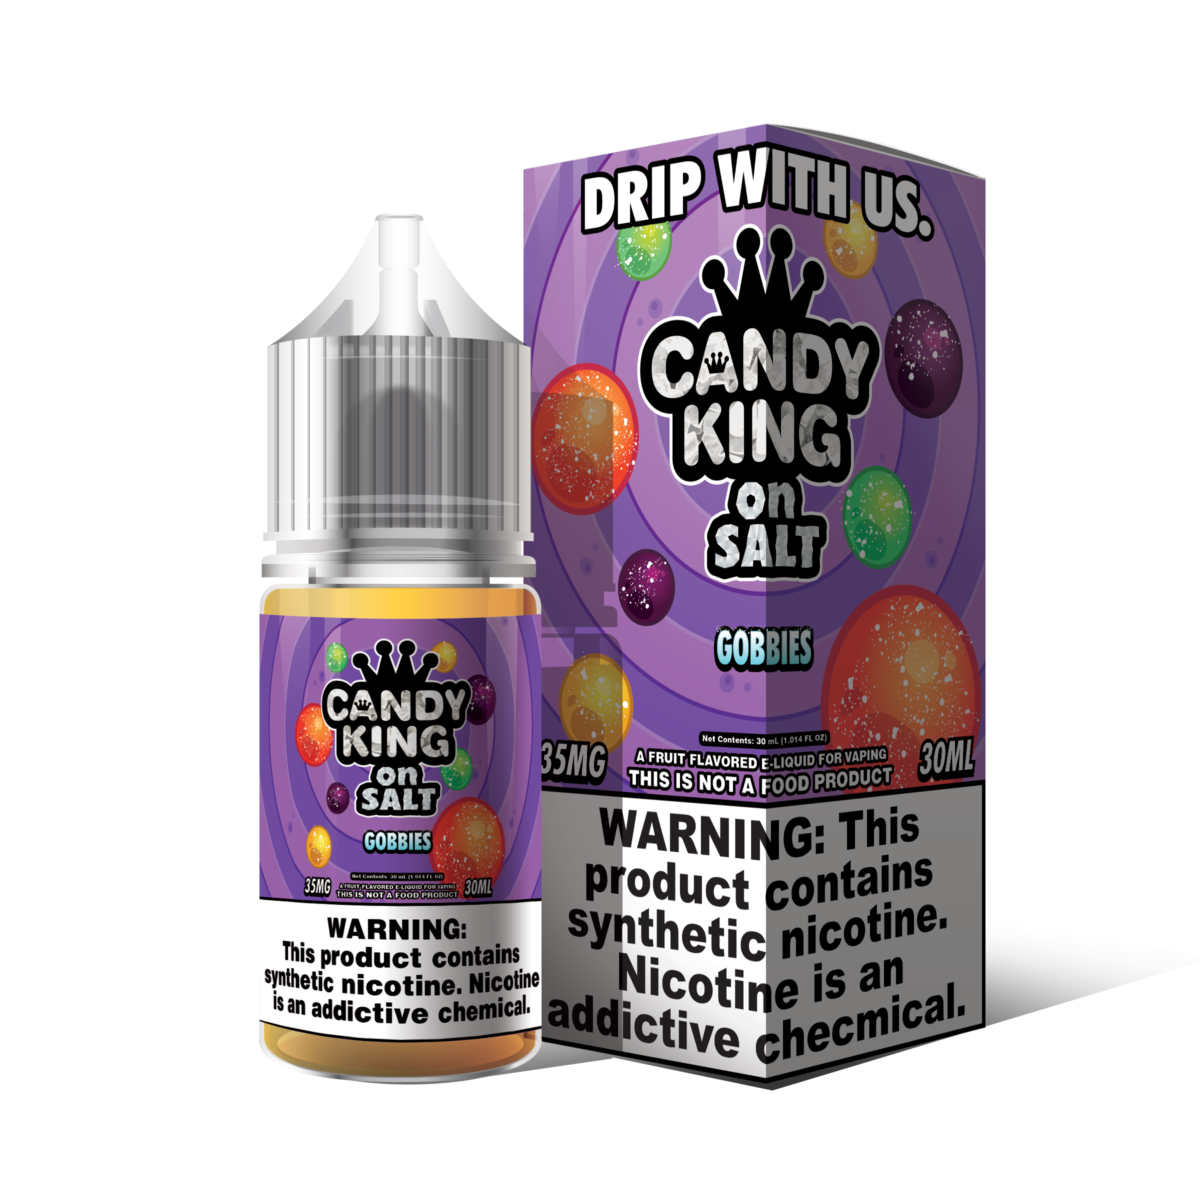 Gobbies by Candy King on Salt Series 30mL with Packaging